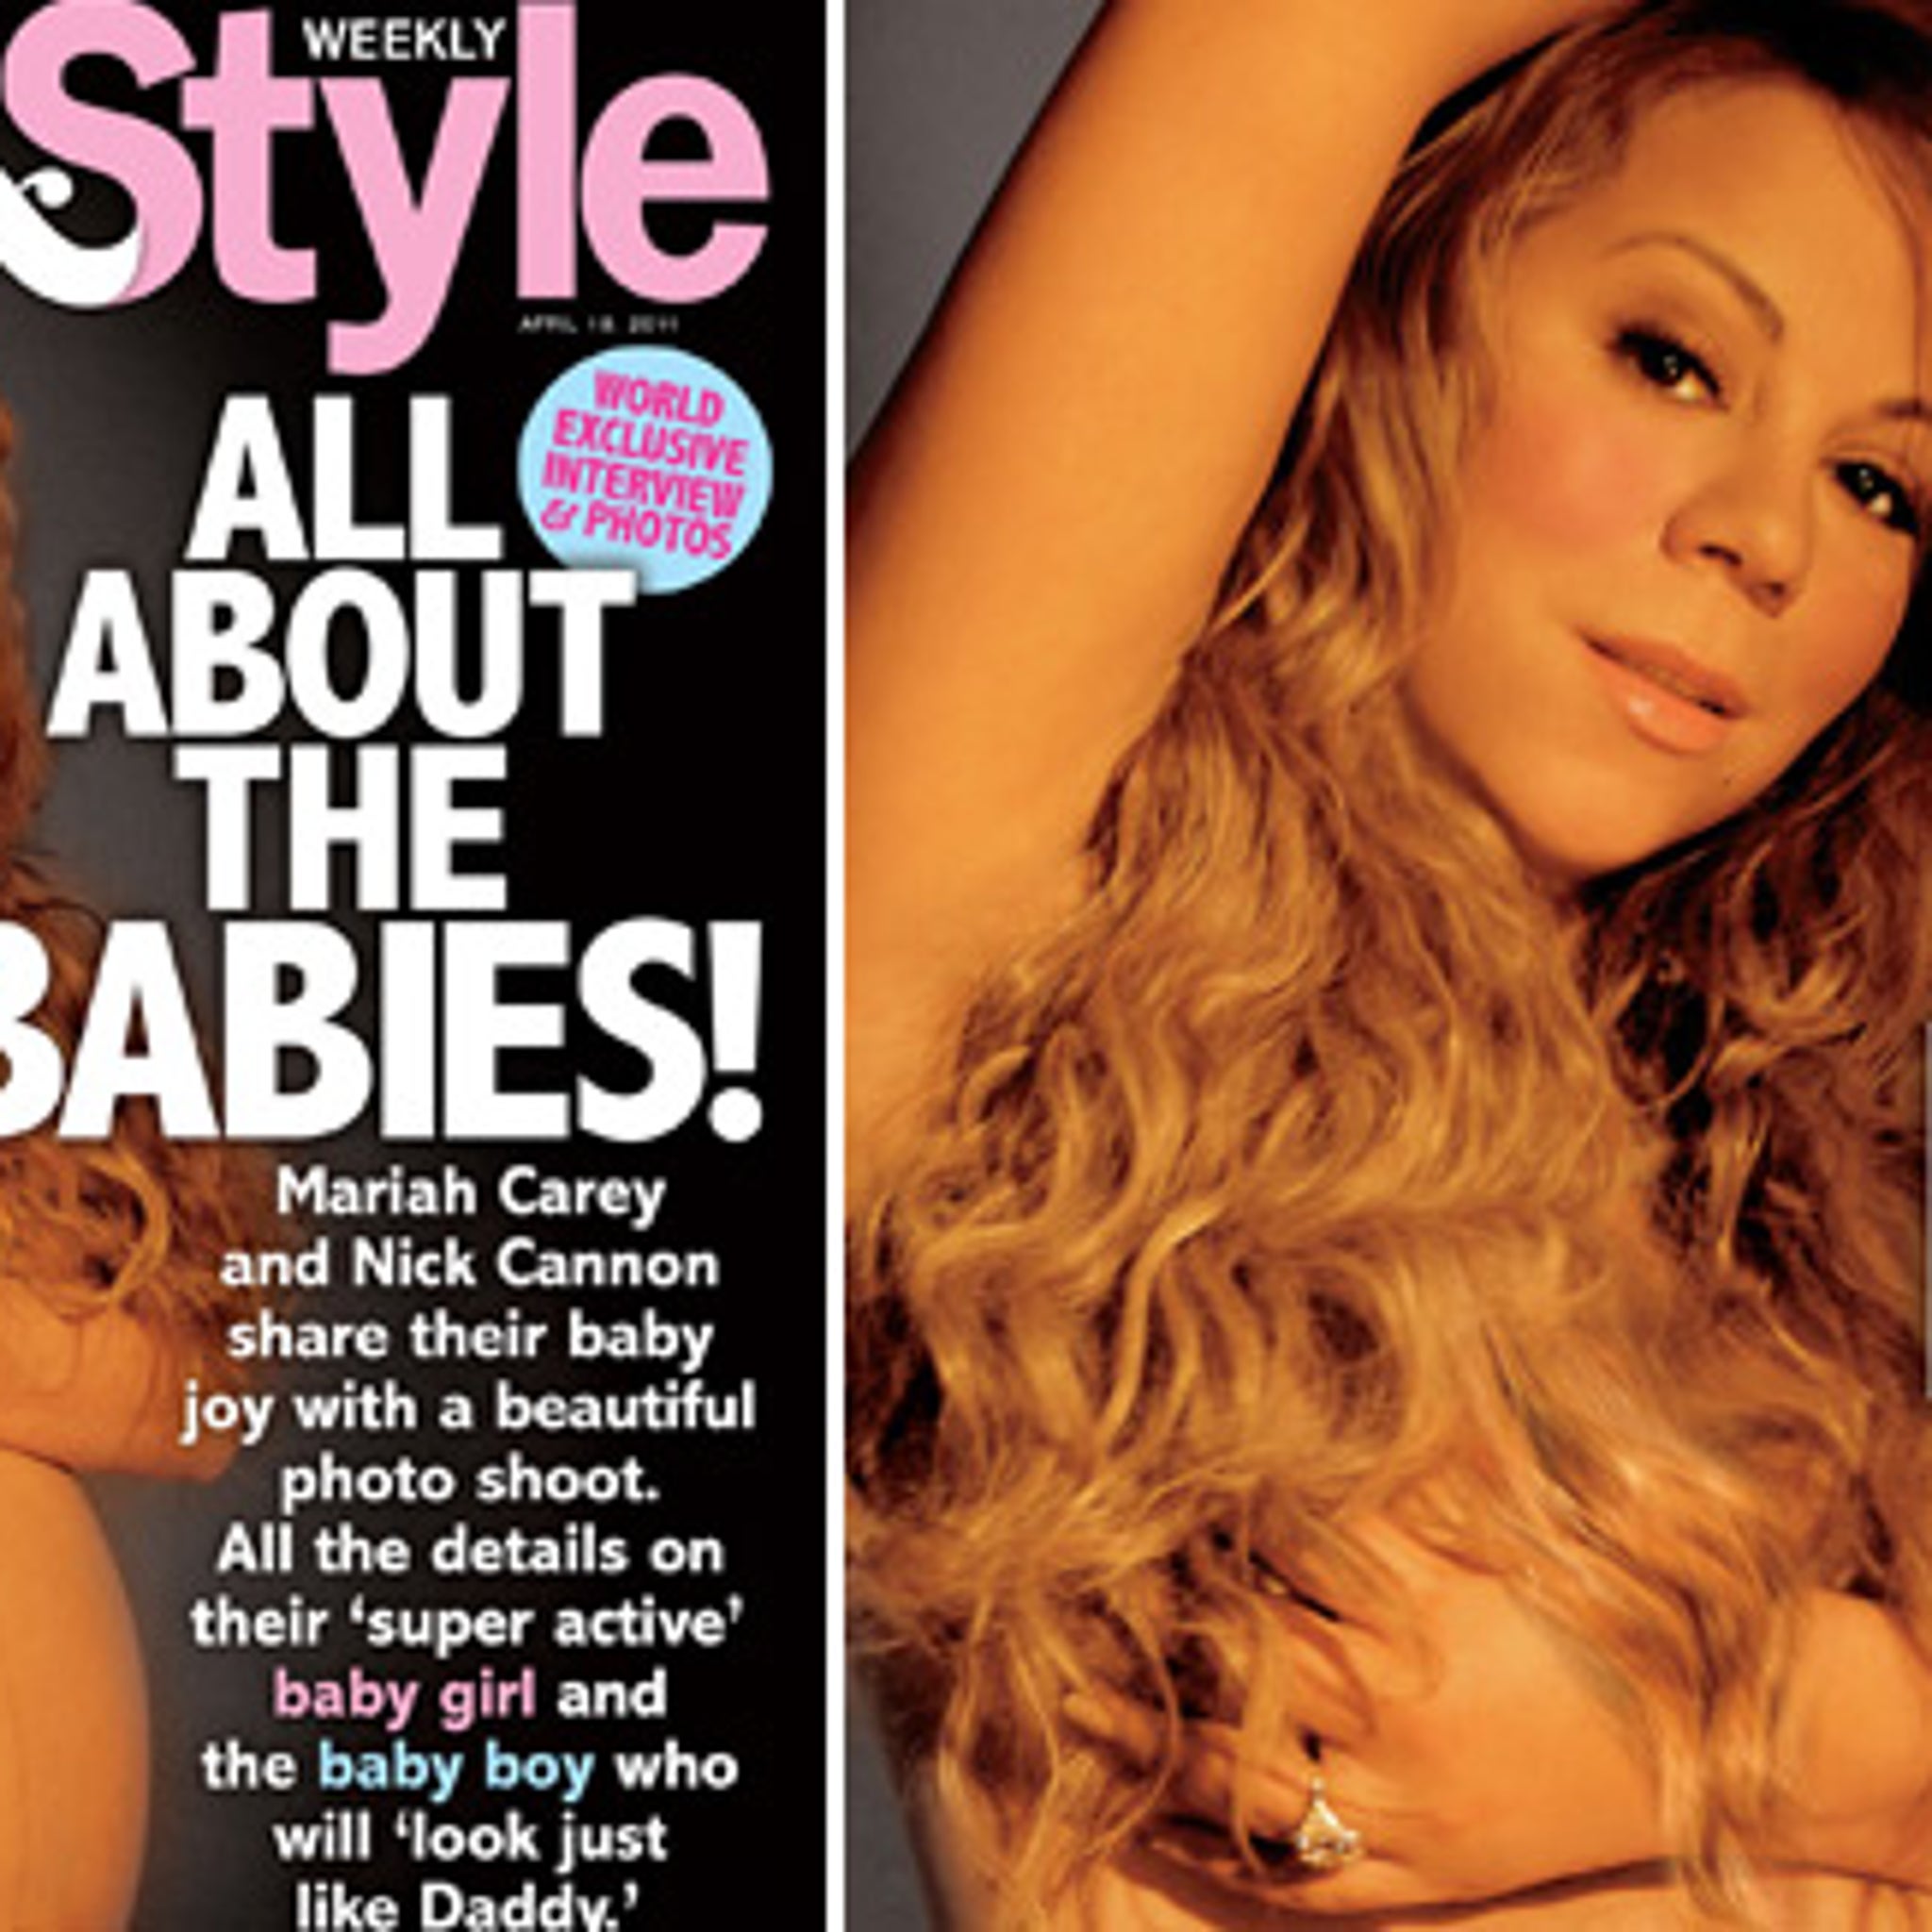 andrew bargery recommends mariah carey xxx pics pic